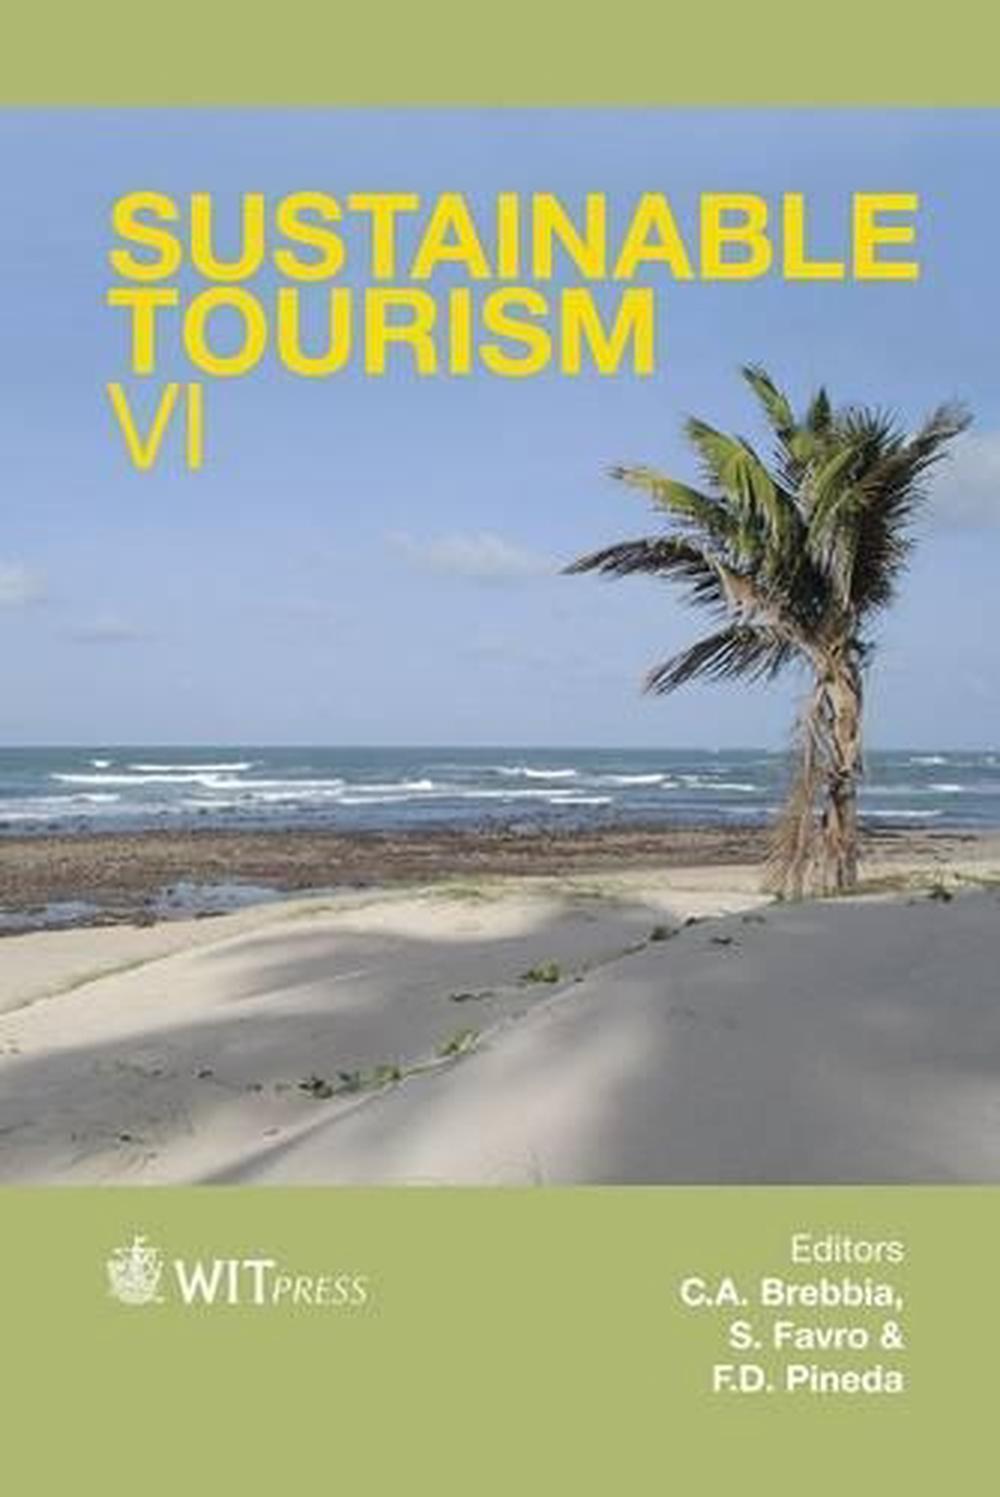 books on sustainable tourism